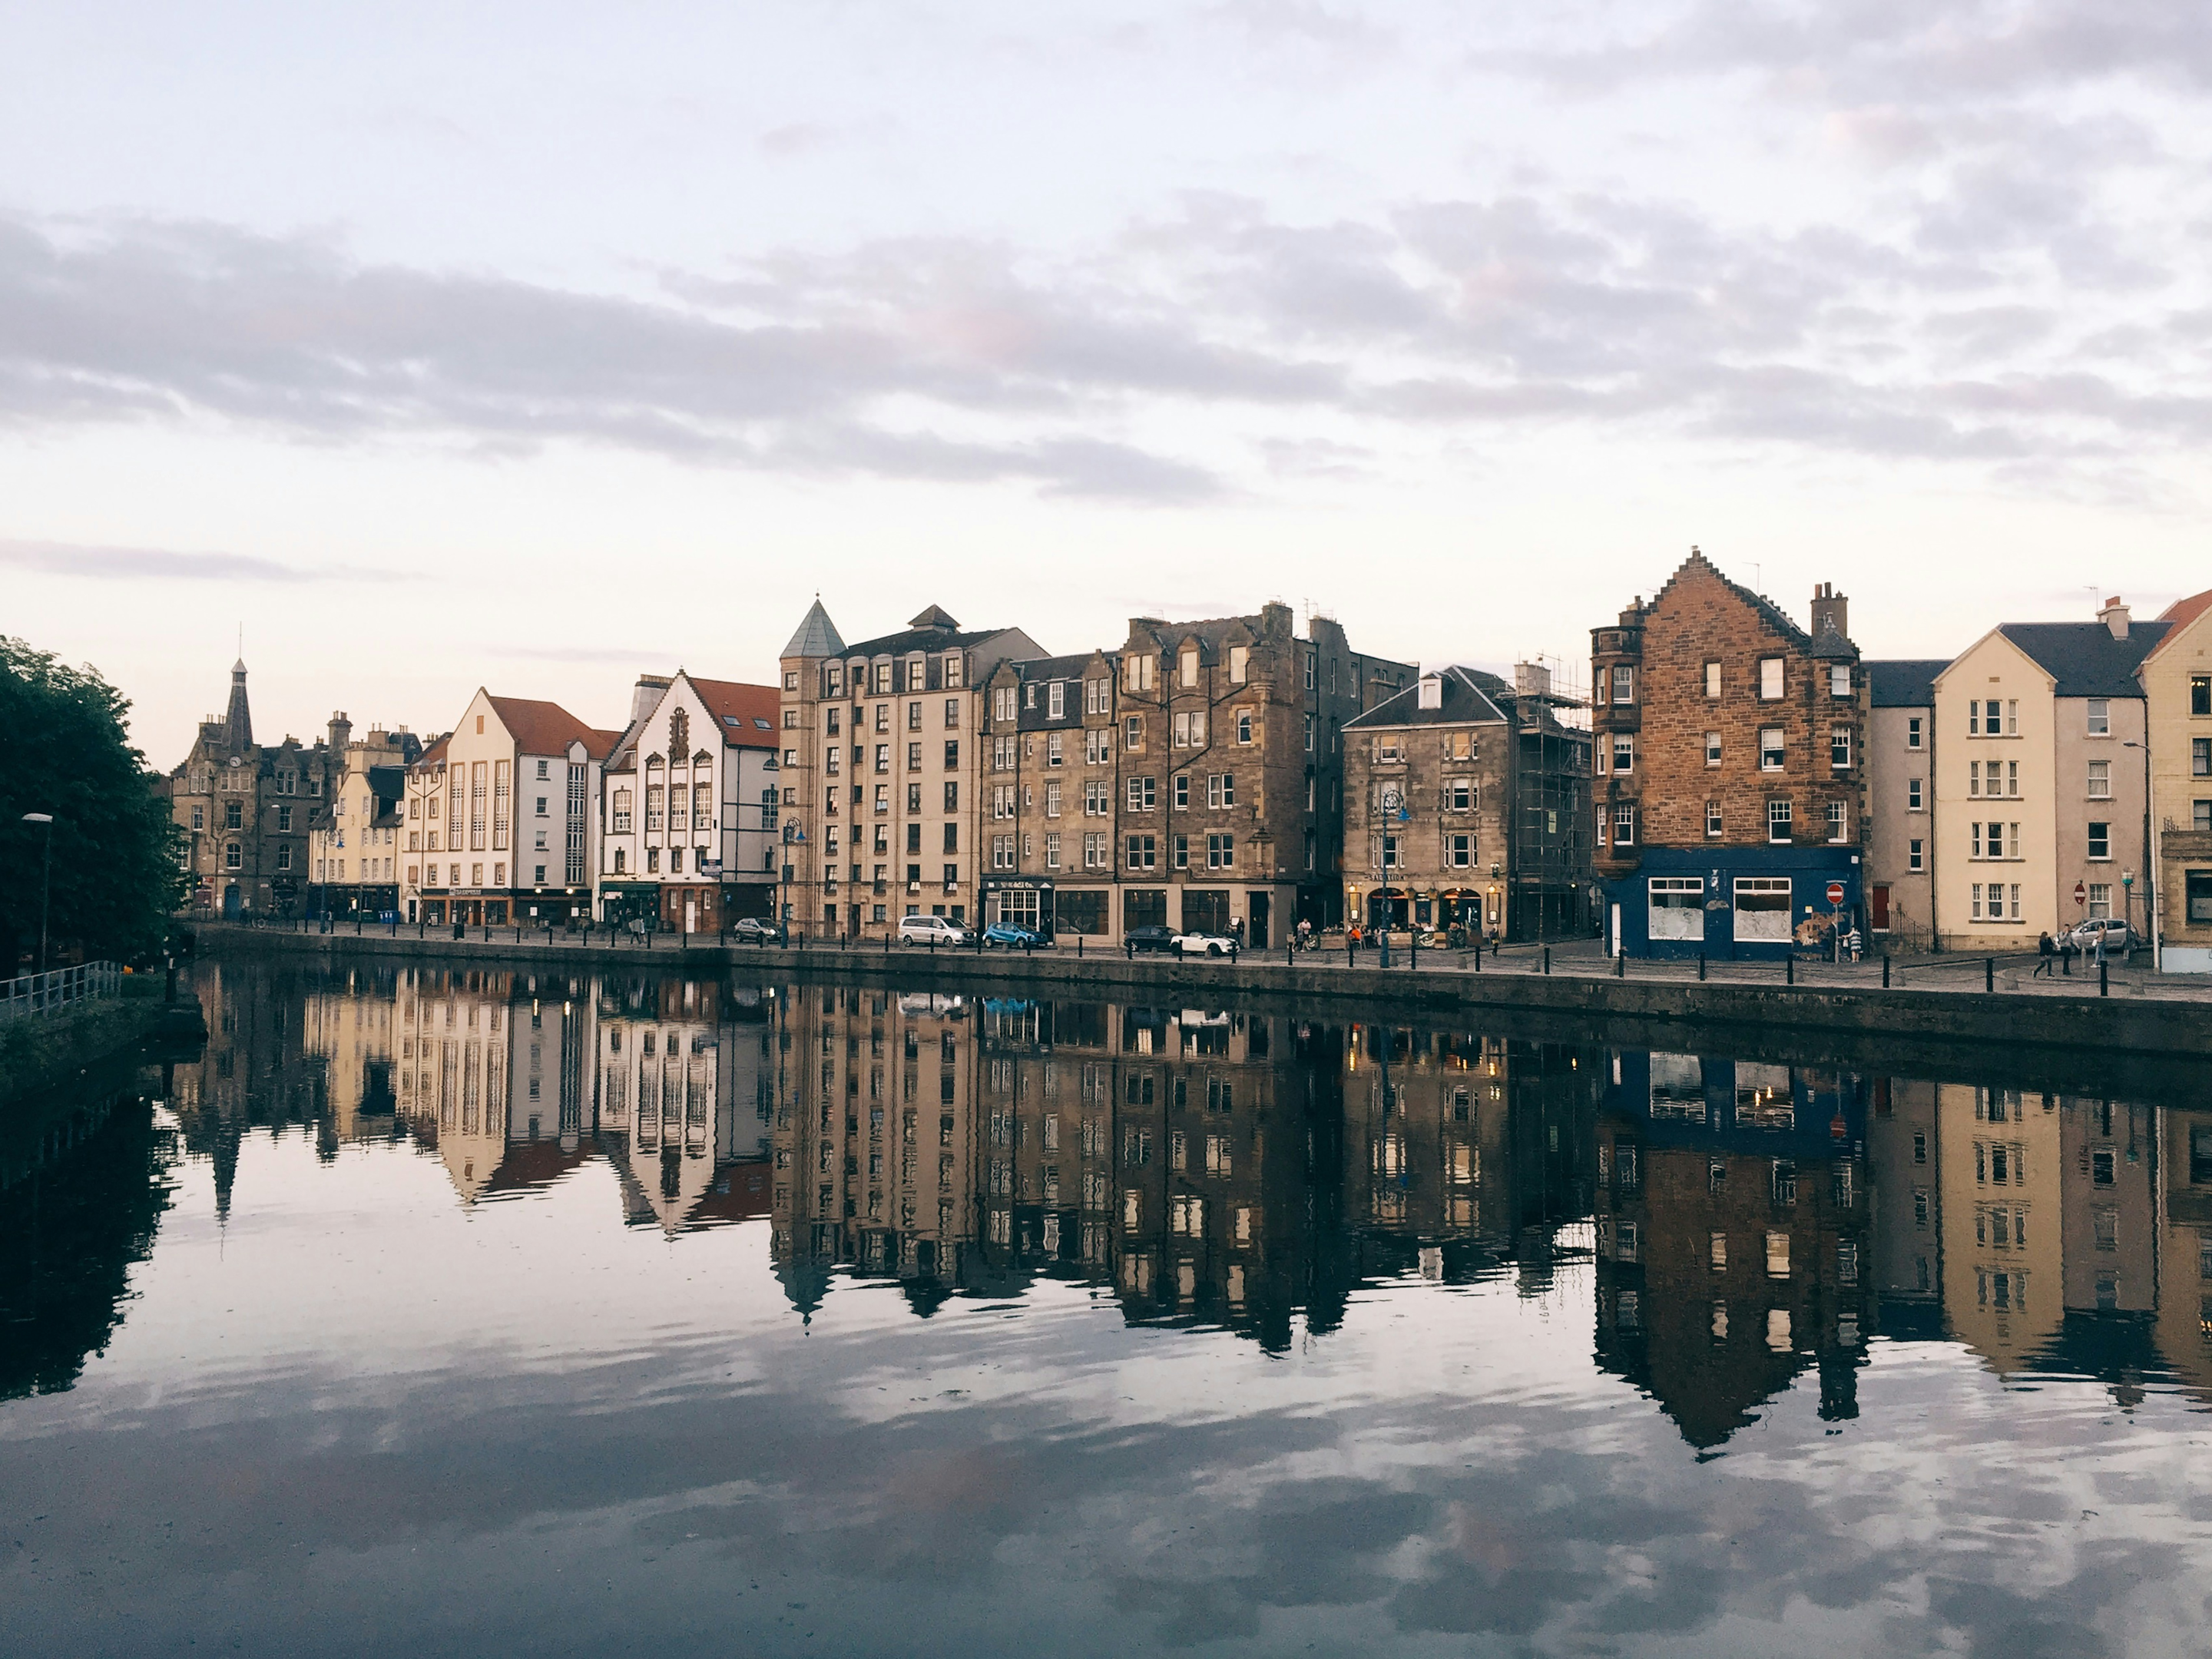 Leith is just a short distance from our new home development in edinburgh north